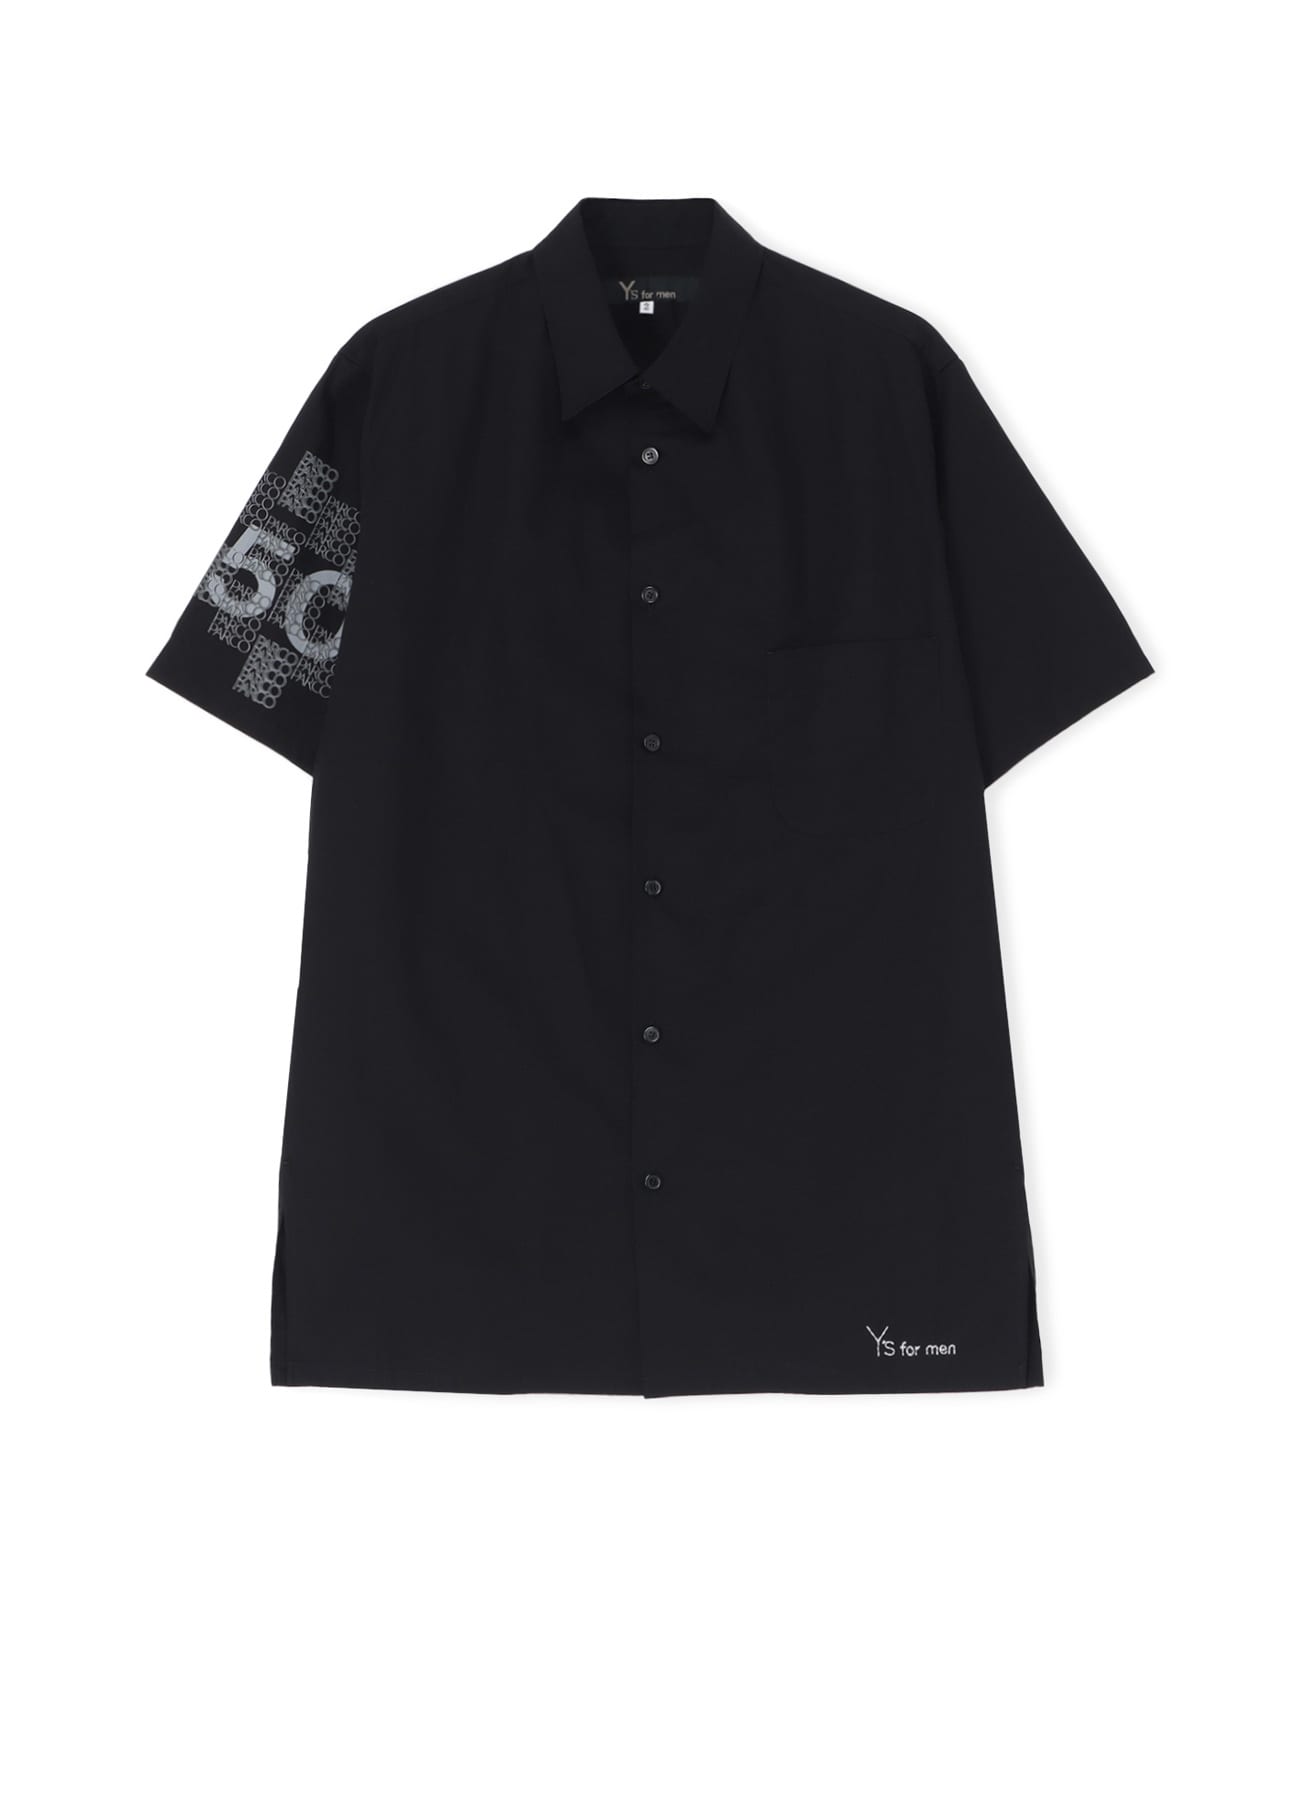 【PARCO 50th LIMITED】HALF SLEEVE SHIRT